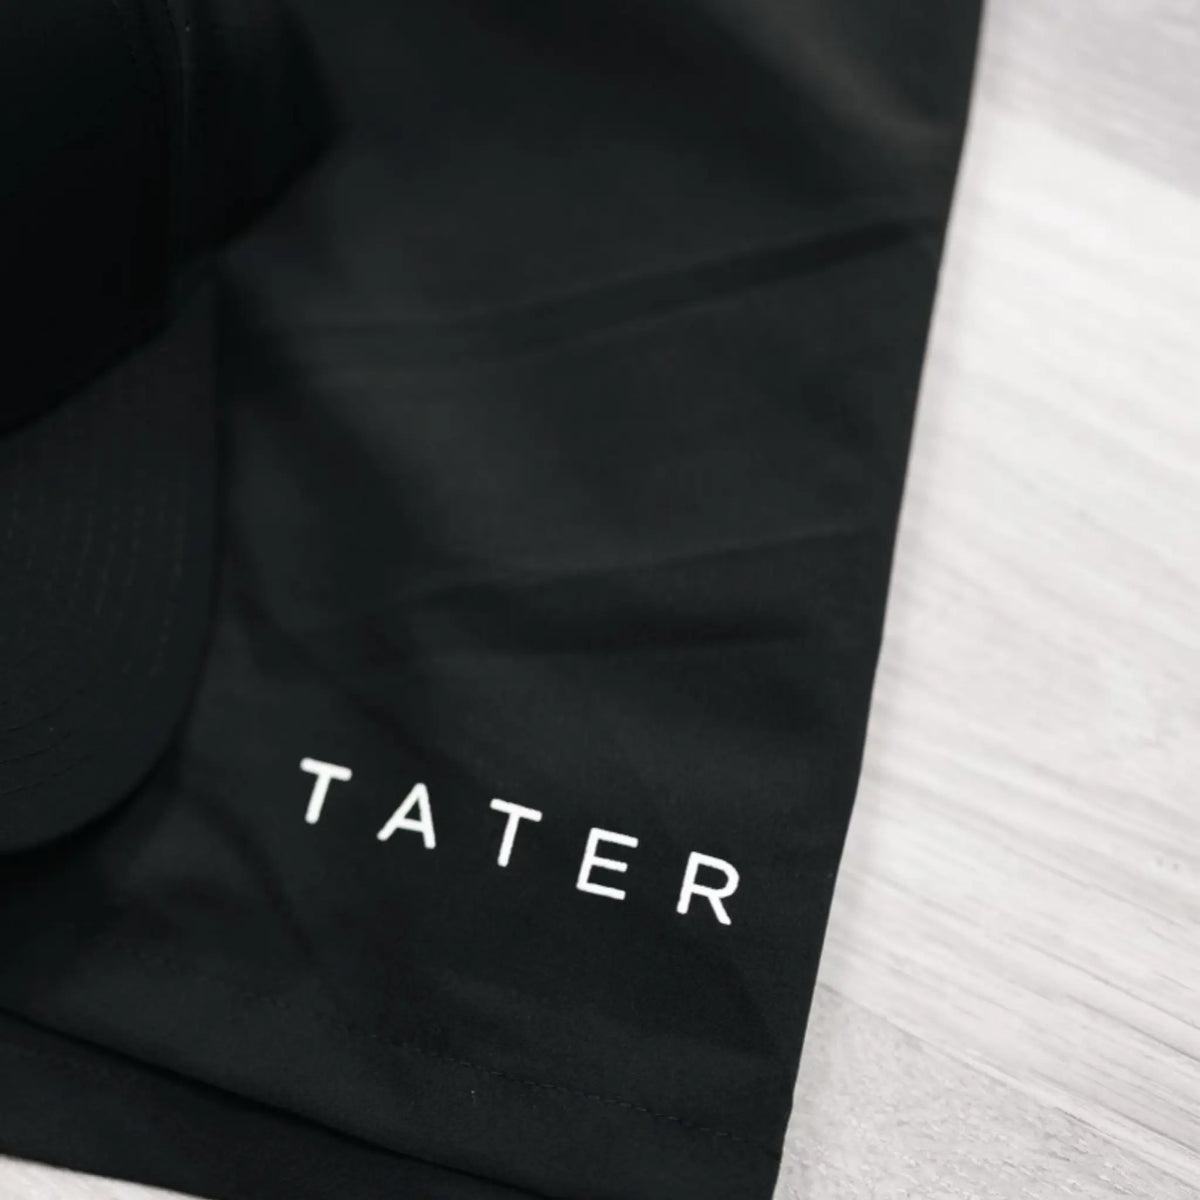  Image shows a close-up of black athletic shorts with the brand name &quot;TATER&quot; printed in white letters, likely indicating a focus on sports or fitness apparel. The material and design suggest that these shorts are made for active use, suitable for workouts, baseball practice, or casual wear. The branding is simple and elegant, which could appeal to consumers looking for stylish yet functional athletic wear.